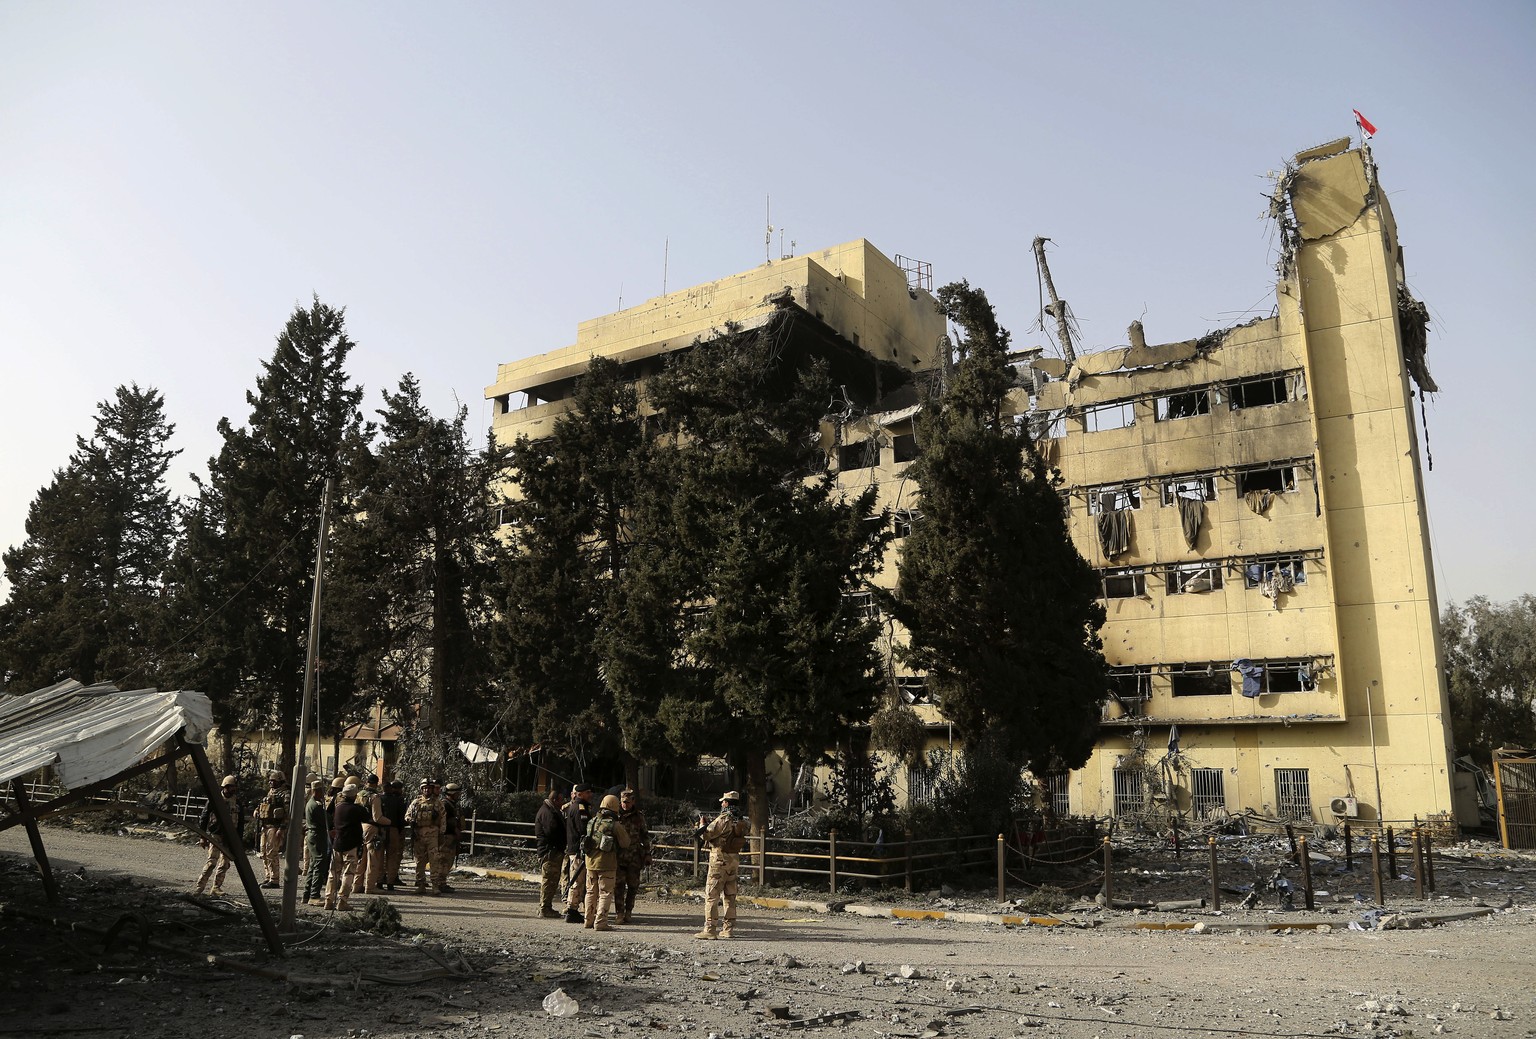 Iraqi security forces stand outside al-Salam hospital in Mosul, Iraq, Tuesday, Jan. 10, 2017. The Mosul hospital has been left almost completely gutted by the battle to retake it. Al-Salam hospital wa ...